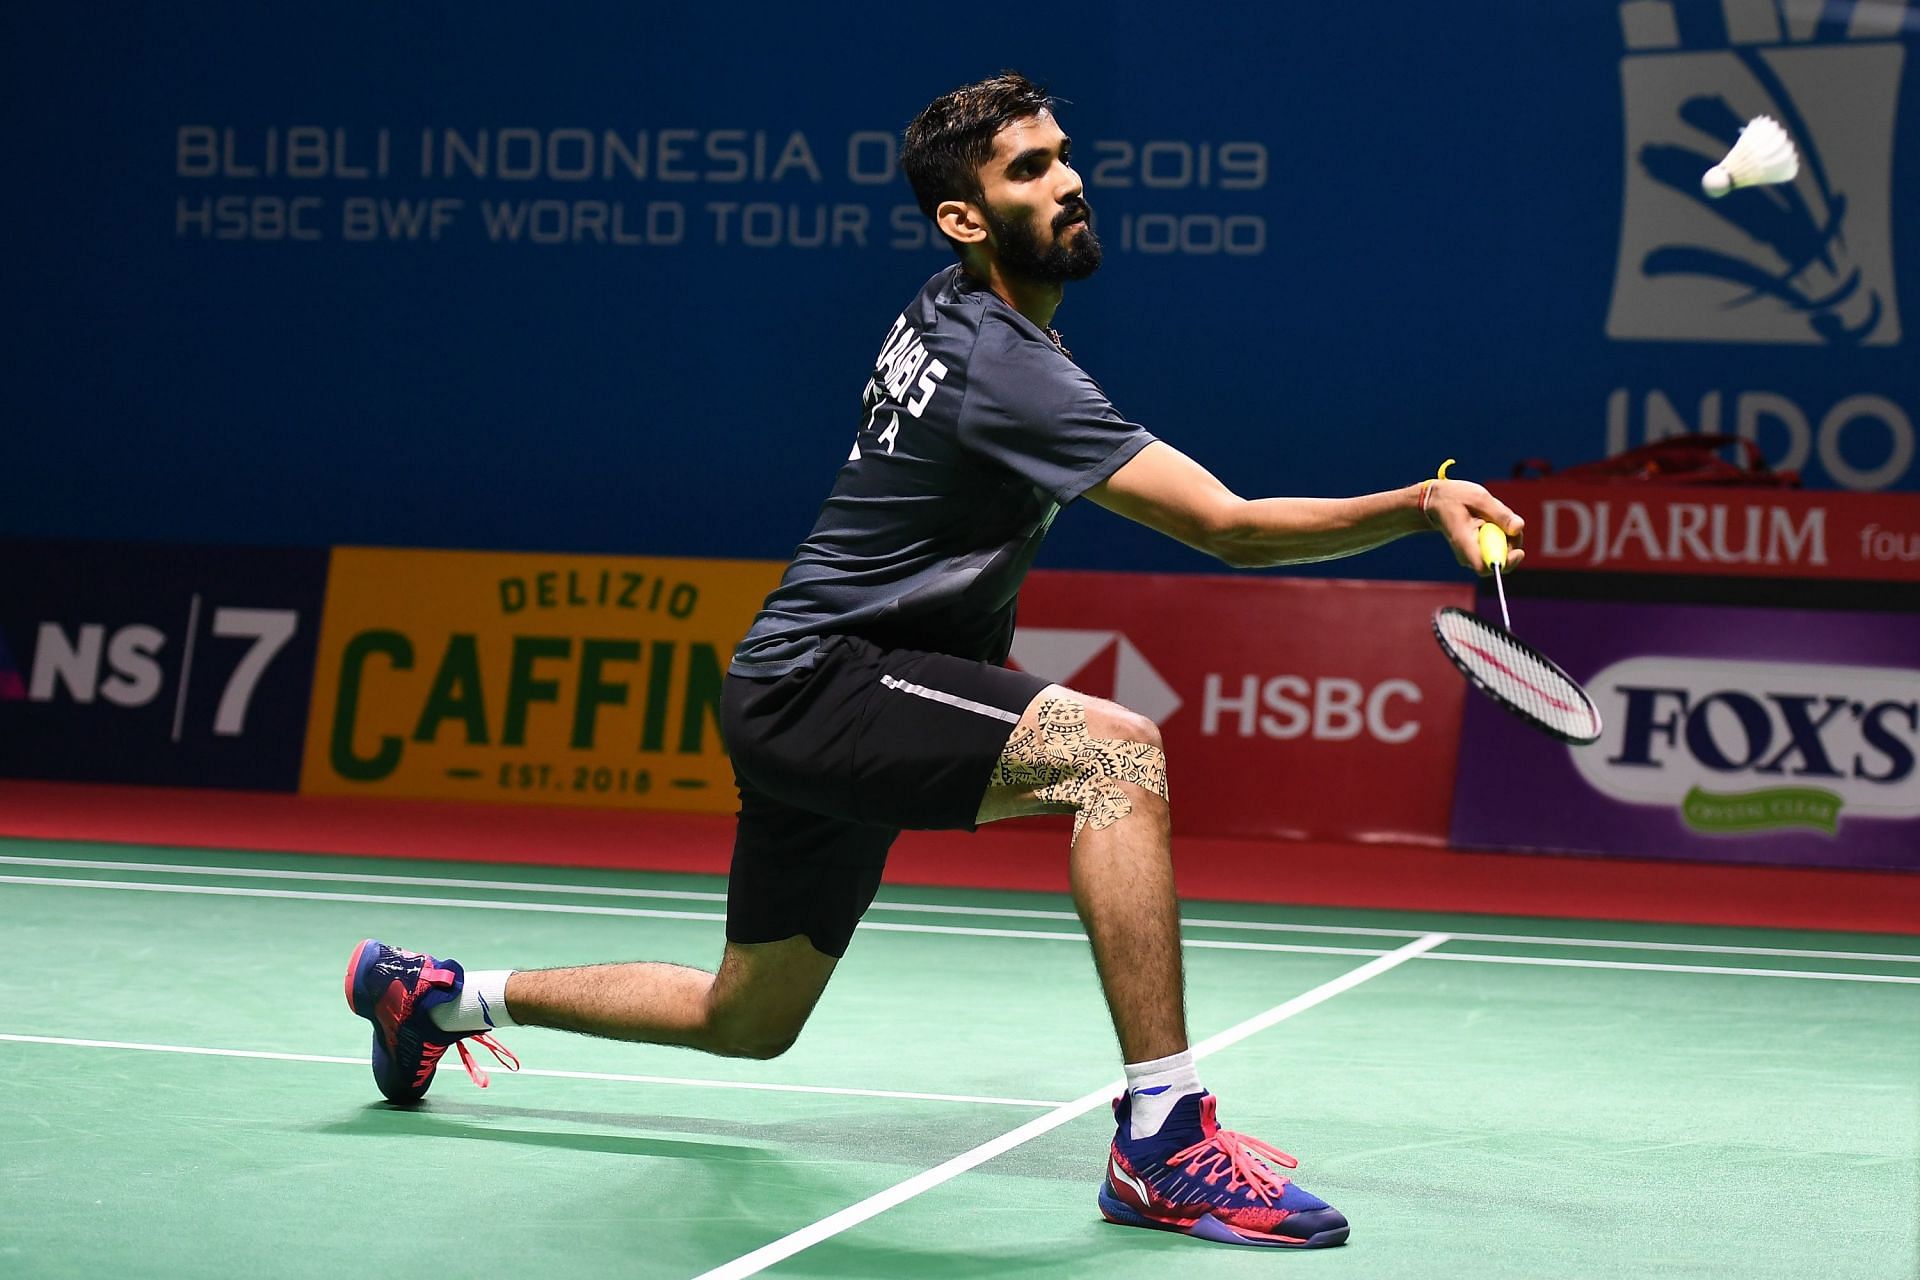 Kidambi Srikanth in action at the 2019 Indonesia Open